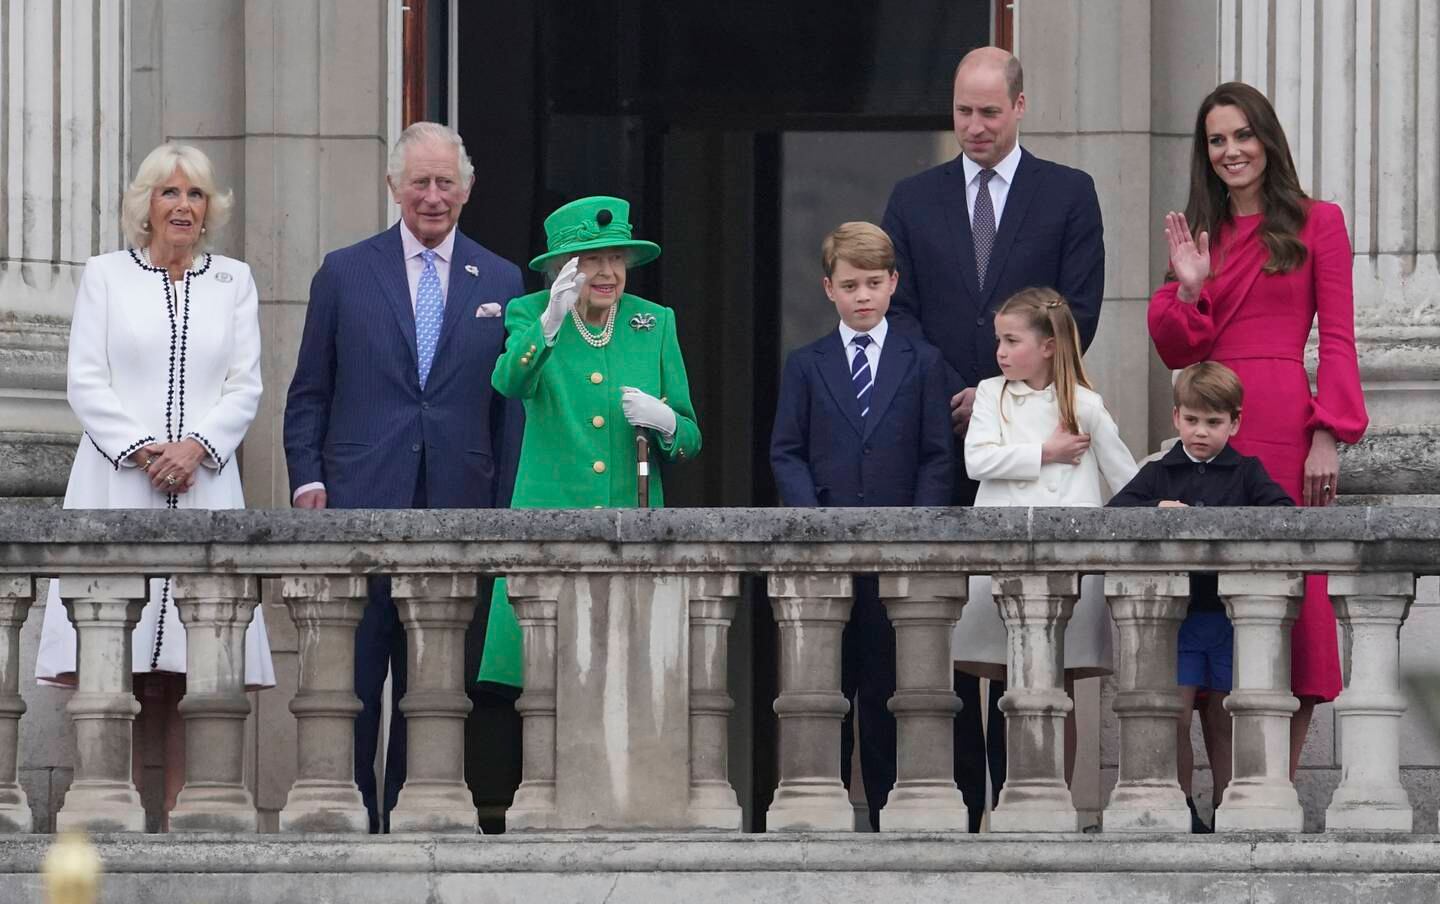 Camilla, Duchess of Cornwall, Prince Charles, Queen Elizabeth II, Prince George, Prince William, Princess Charlotte, Prince Louis, and Kate, Duchess of Cambridge appear on the balcony of Buckingham Palace during the platinum jubilee pageant. AP Photo